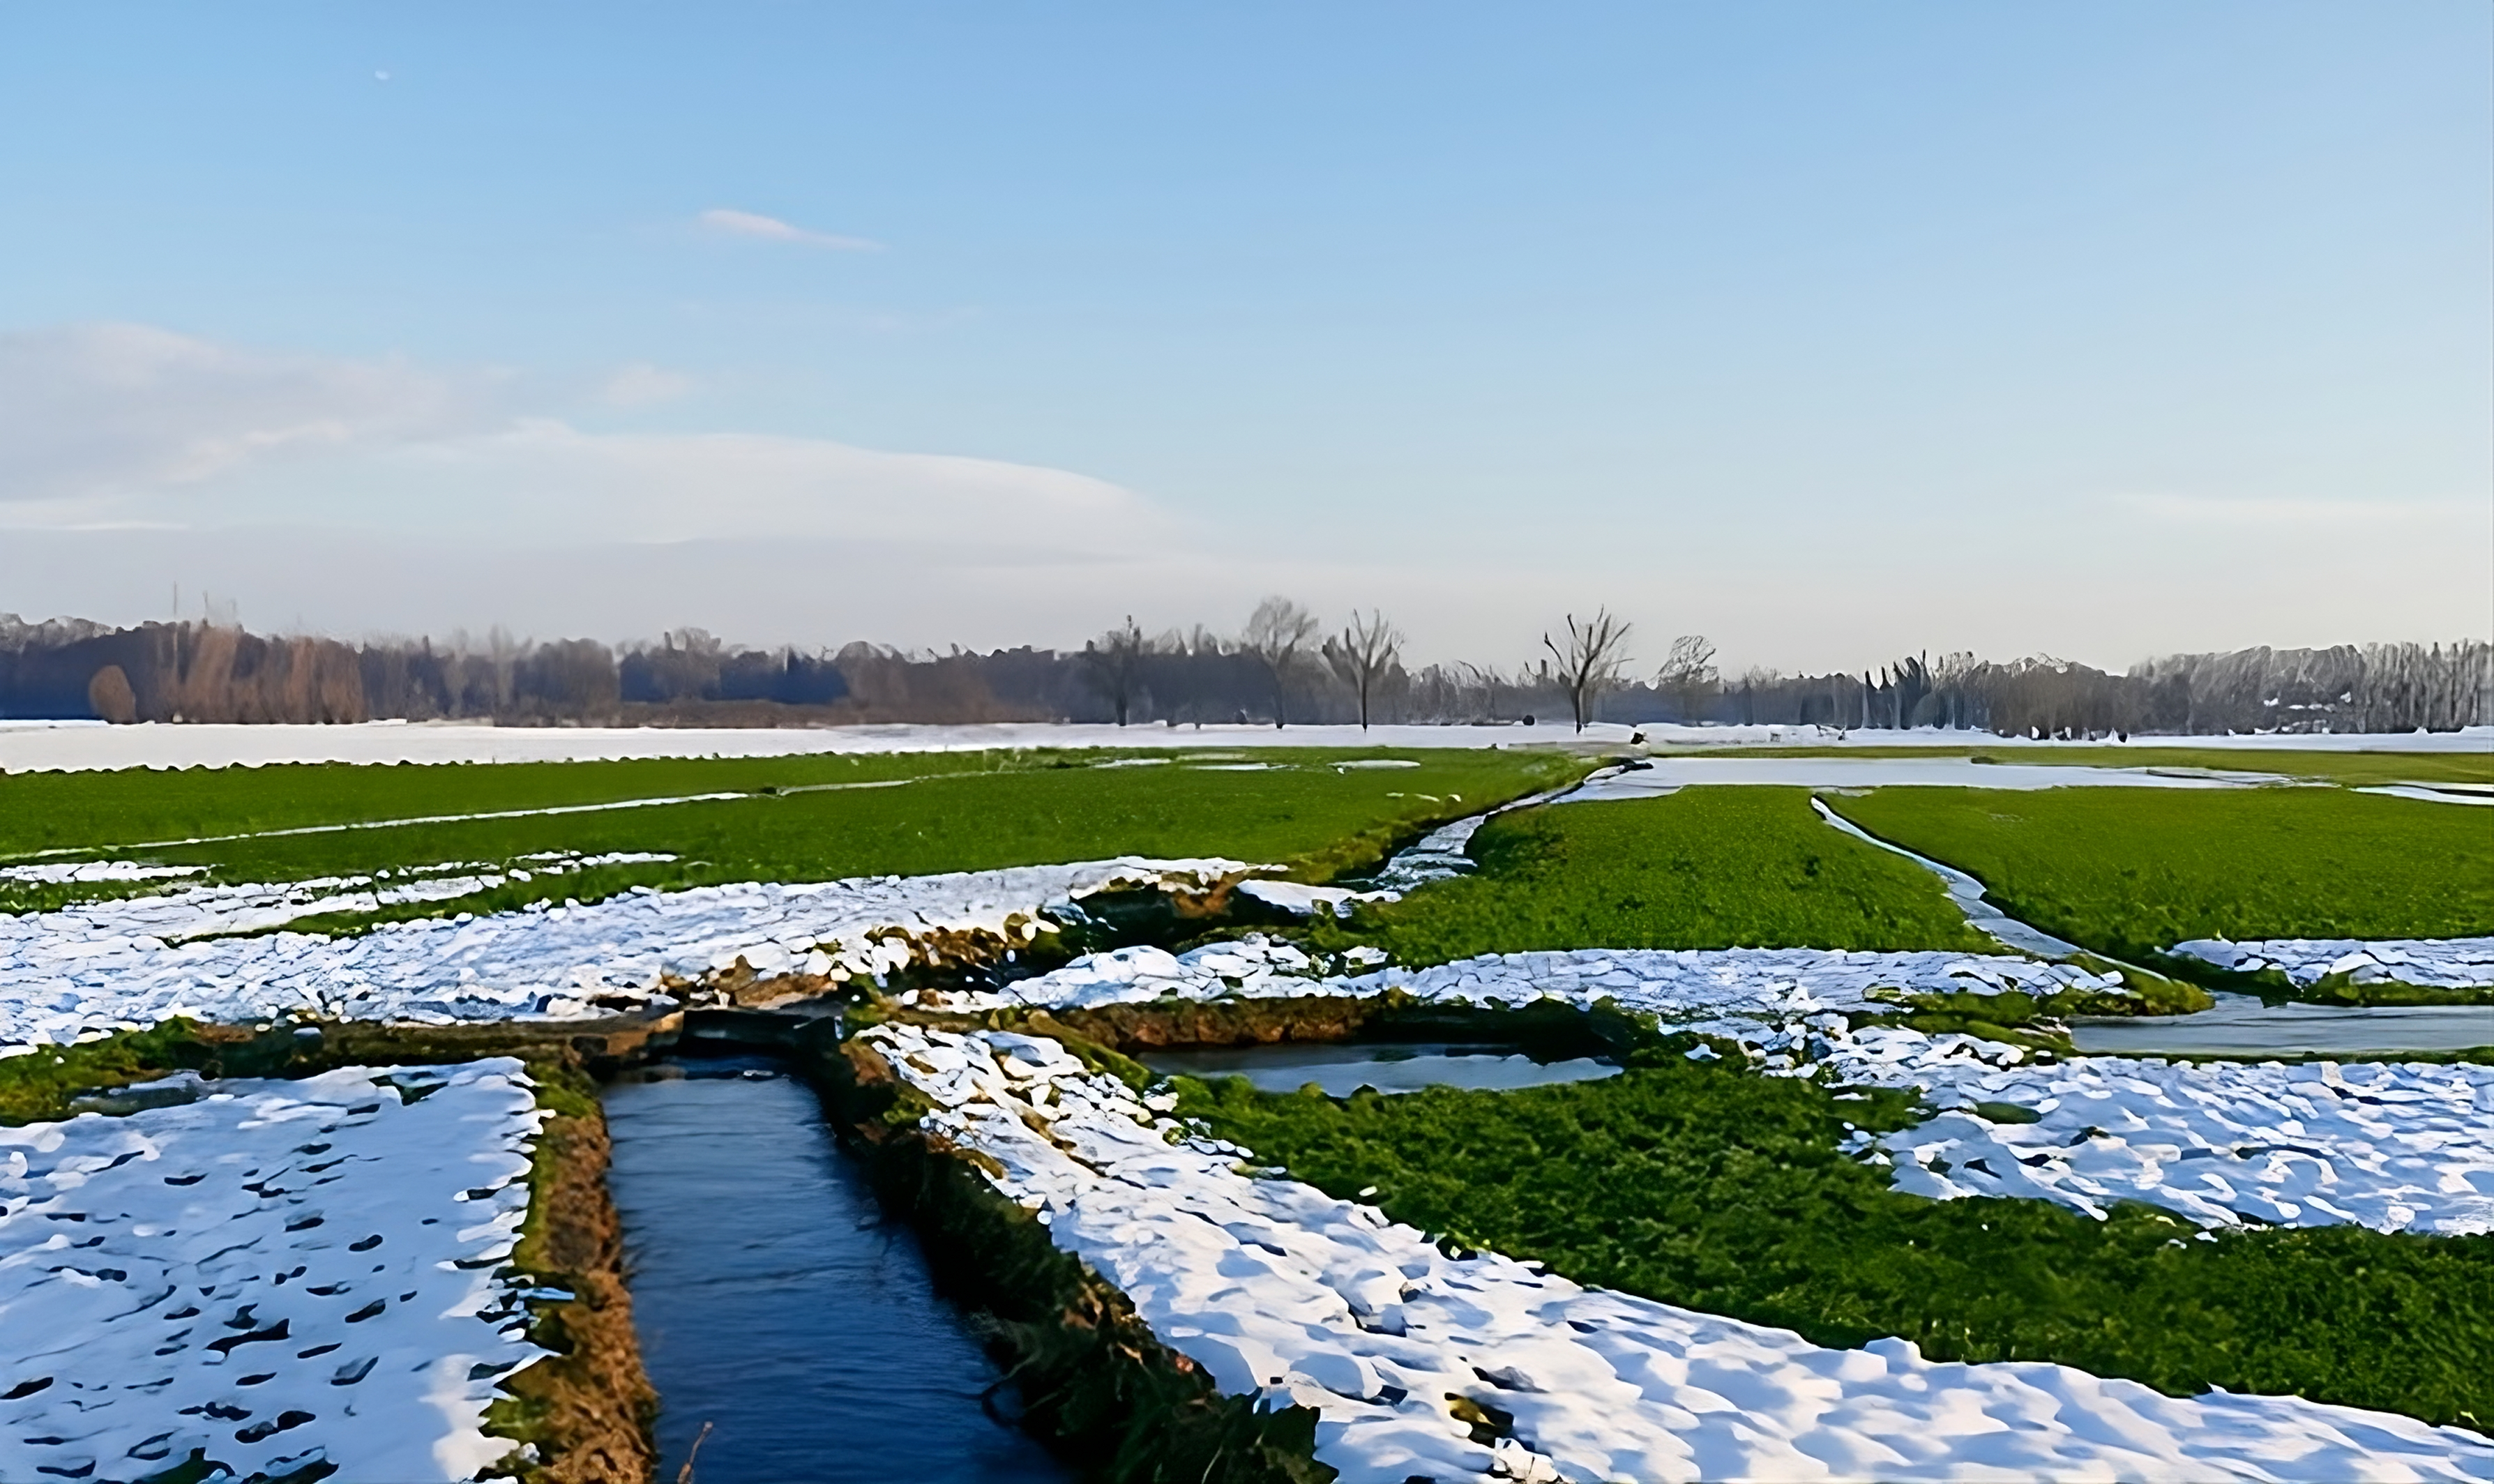 Milan Pilot Action: Winter Irrigation for Groundwater Recharge